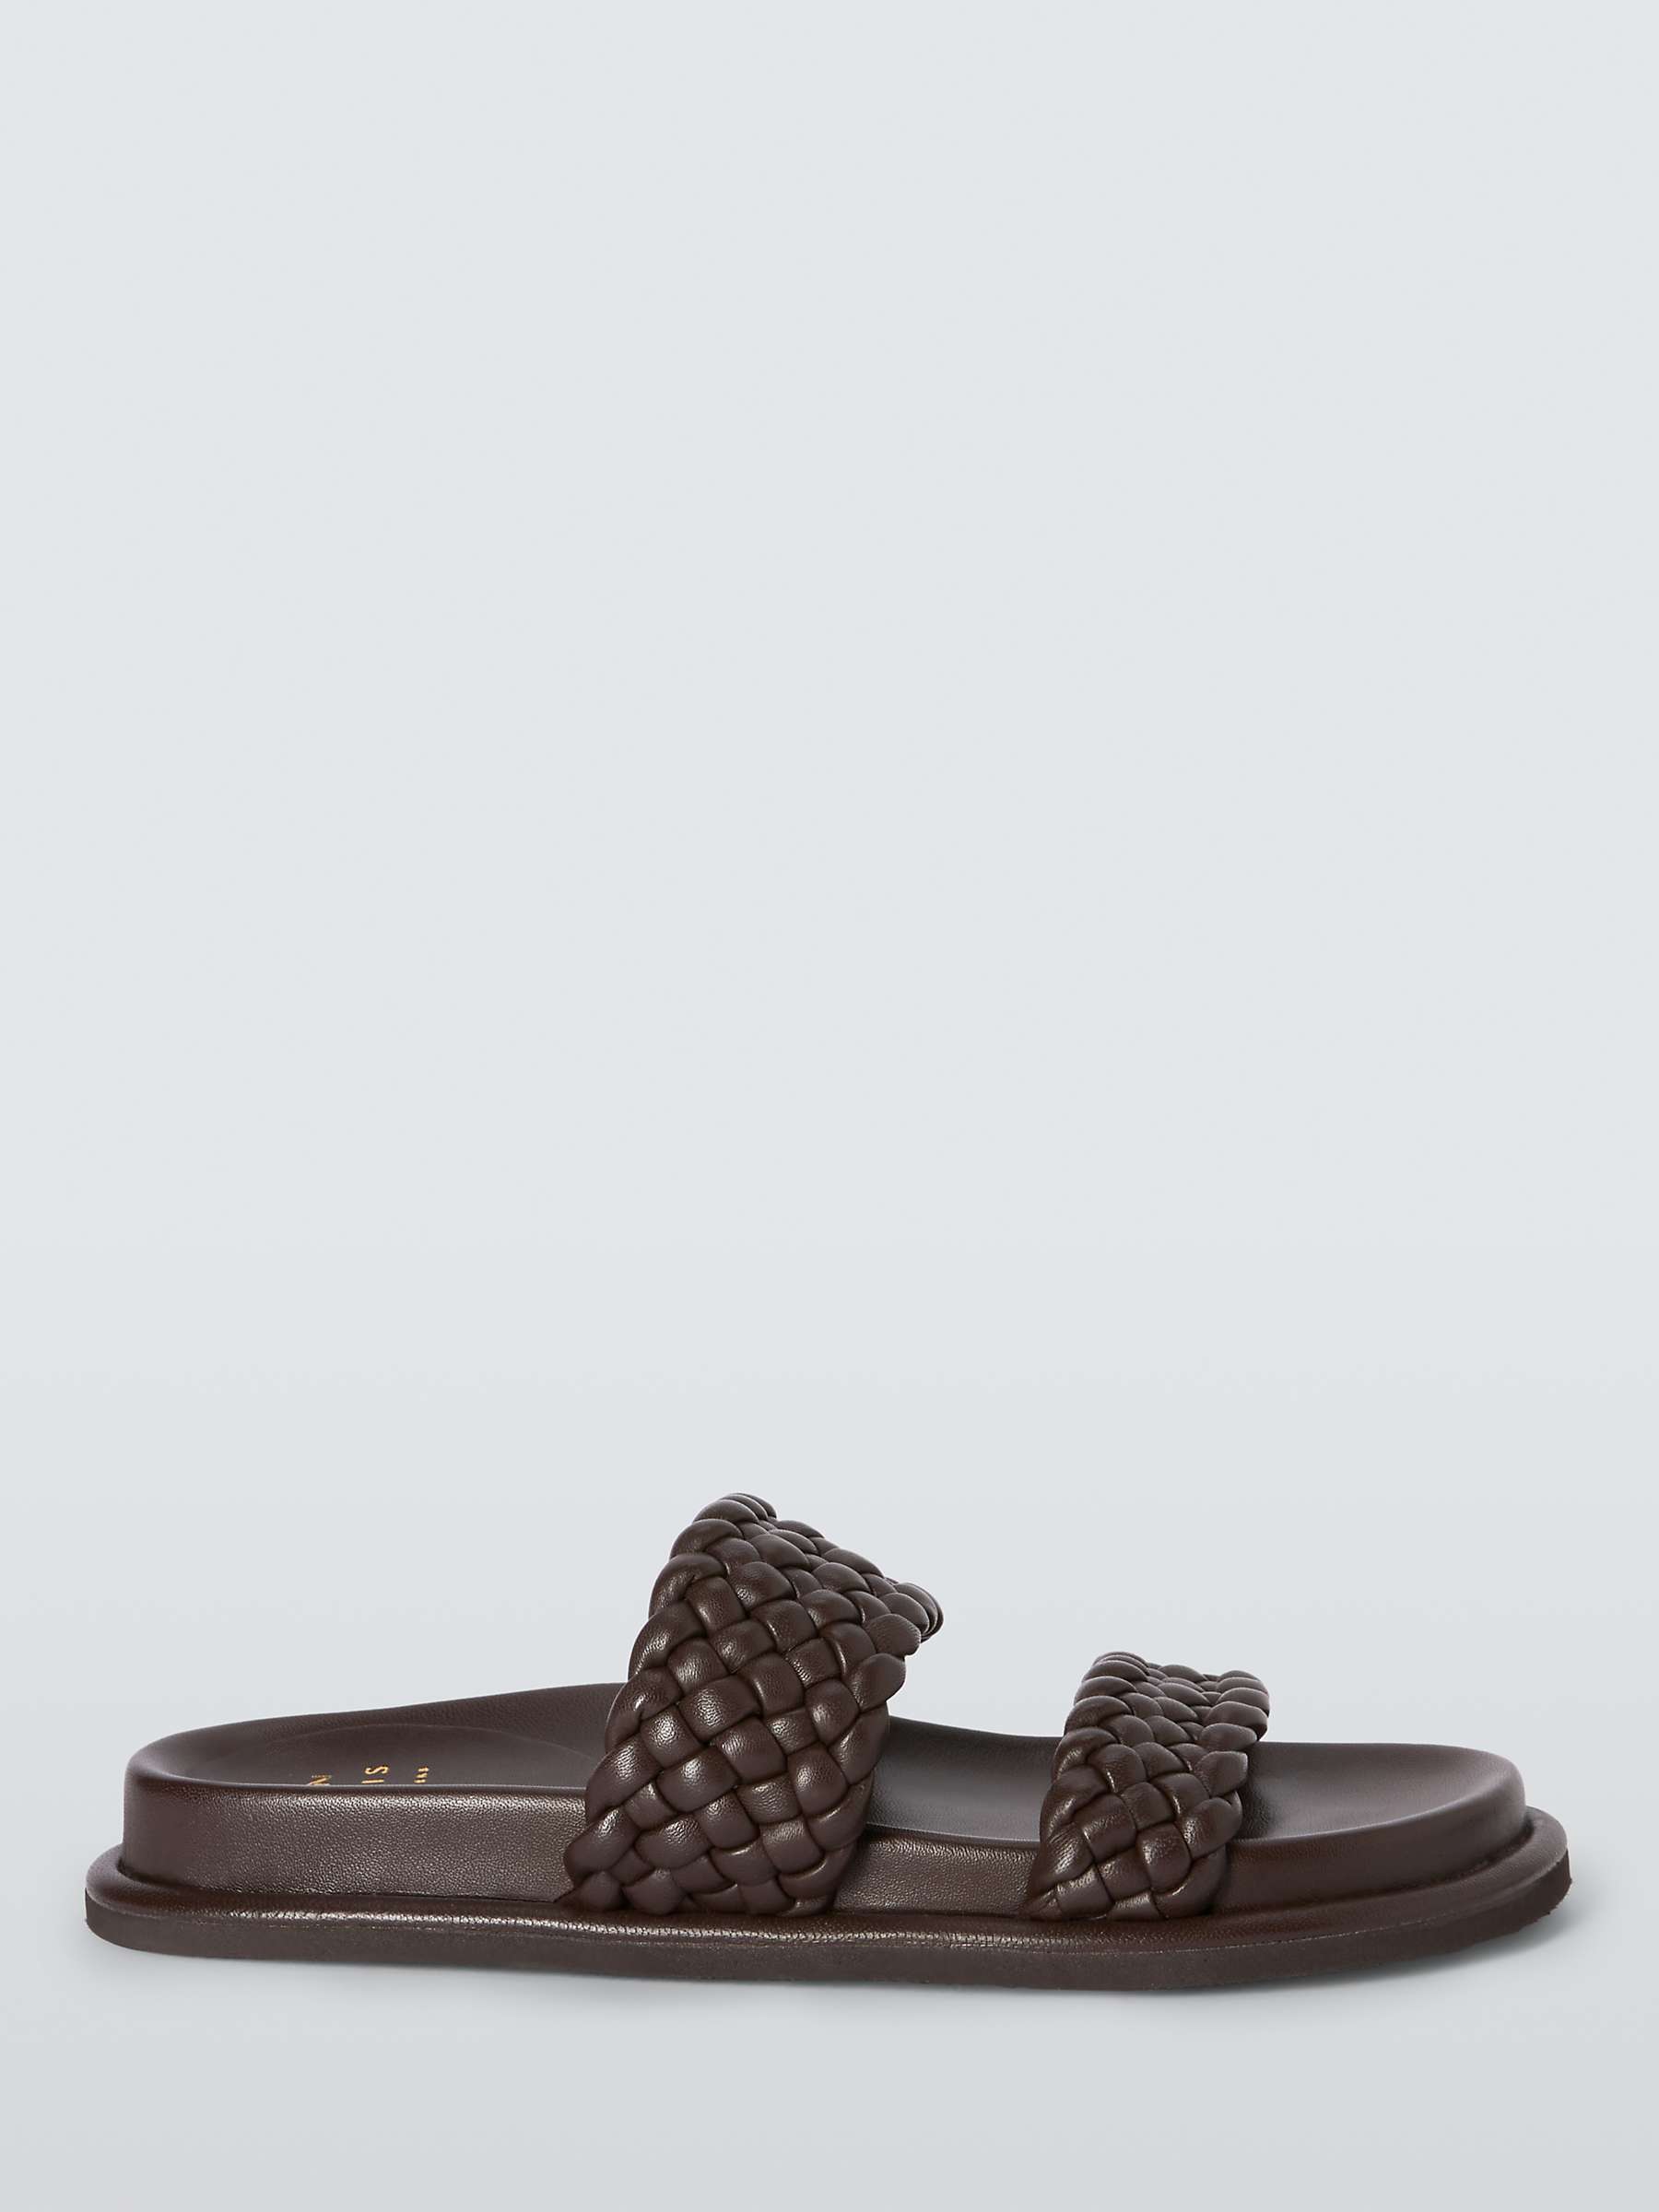 Buy John Lewis Lovey Leather Woven Padded Footbed Sliders, Chocolate Online at johnlewis.com